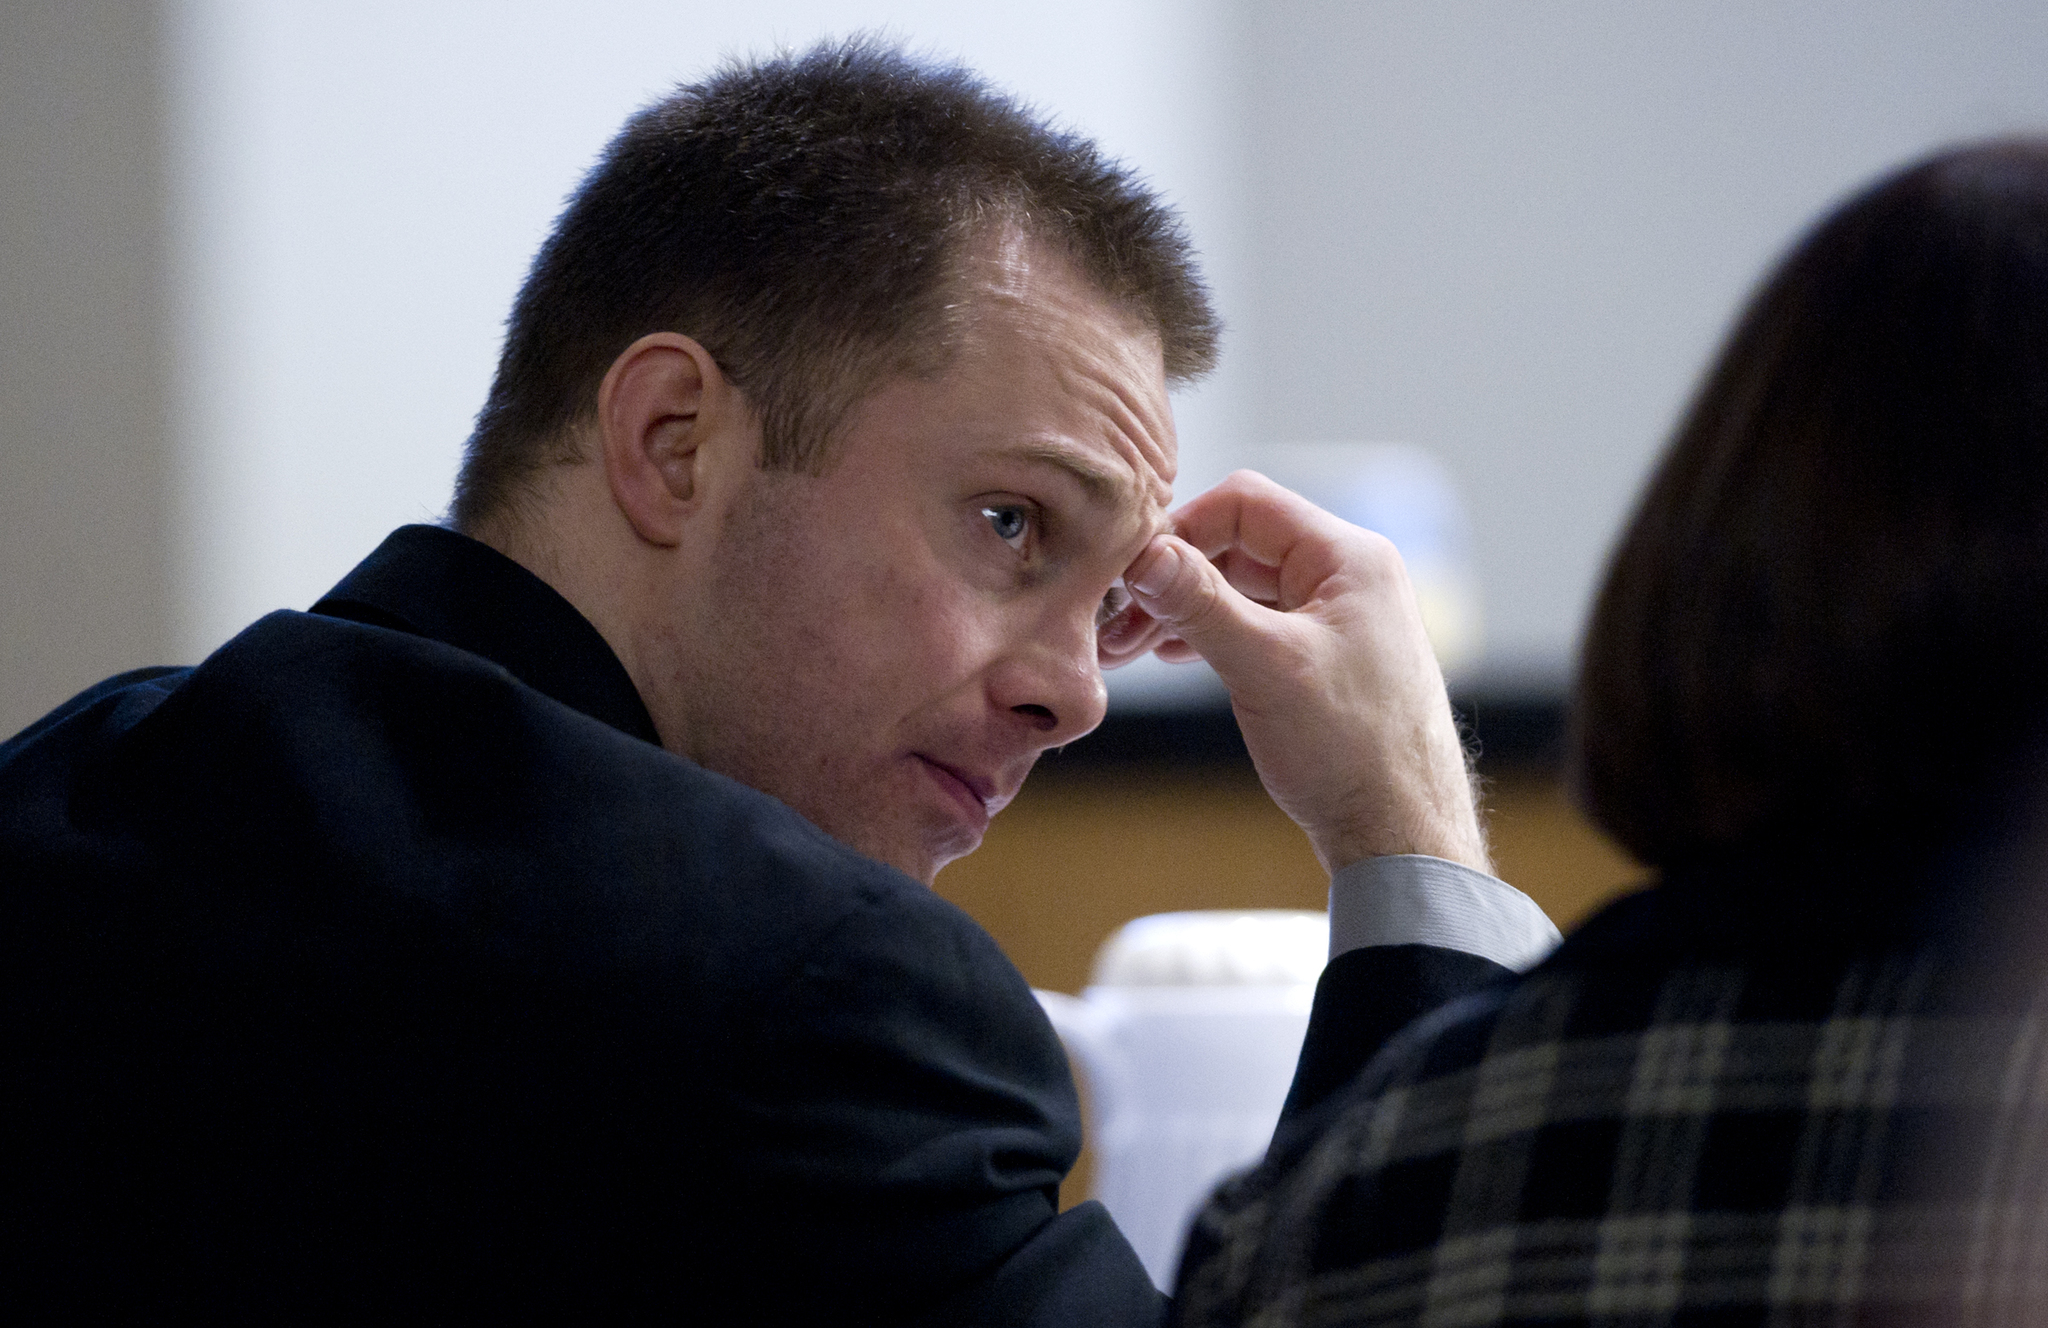 Christopher D. Strawn appears in Juneau Superior Court on Thursday during his trial on charges in the murder of 30-year-old Brandon C. Cook at the Kodzoff Acres Mobile Home Park Oct. 20, 2015. (Michael Penn | Juneau Empire)